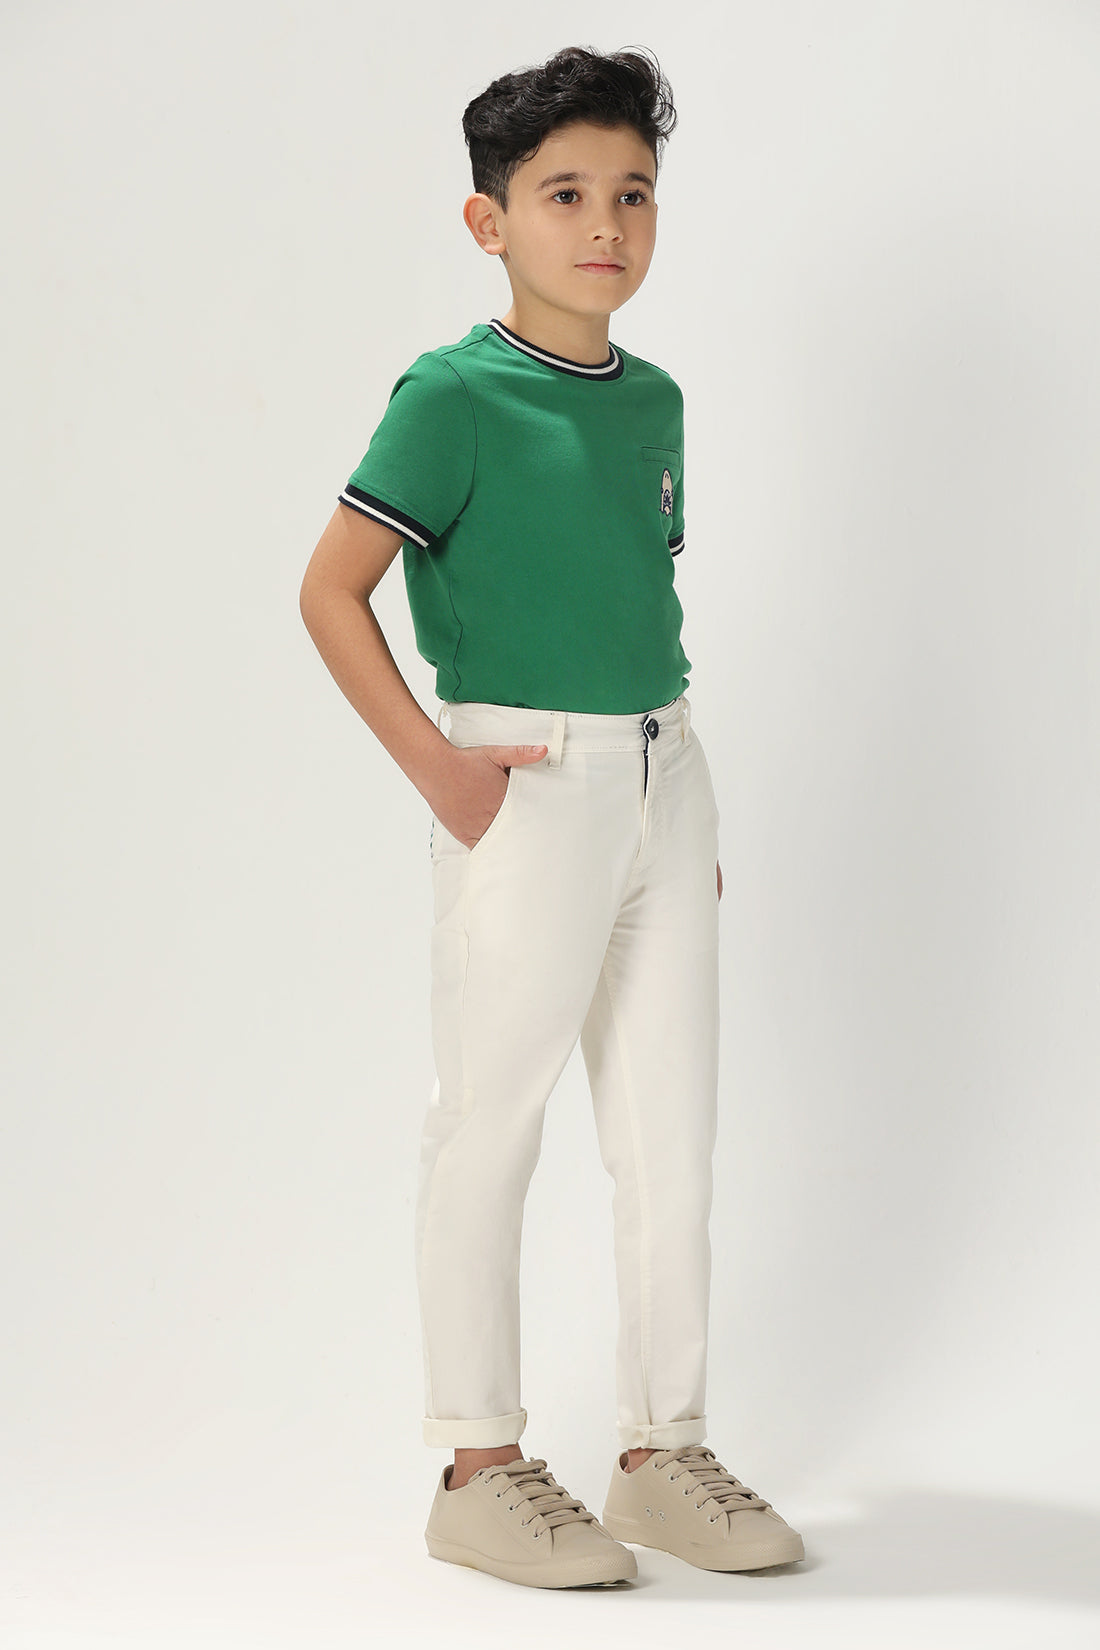 One Friday Kids Boys Off White Stretchable Cotton Solid Trouser With Pockets